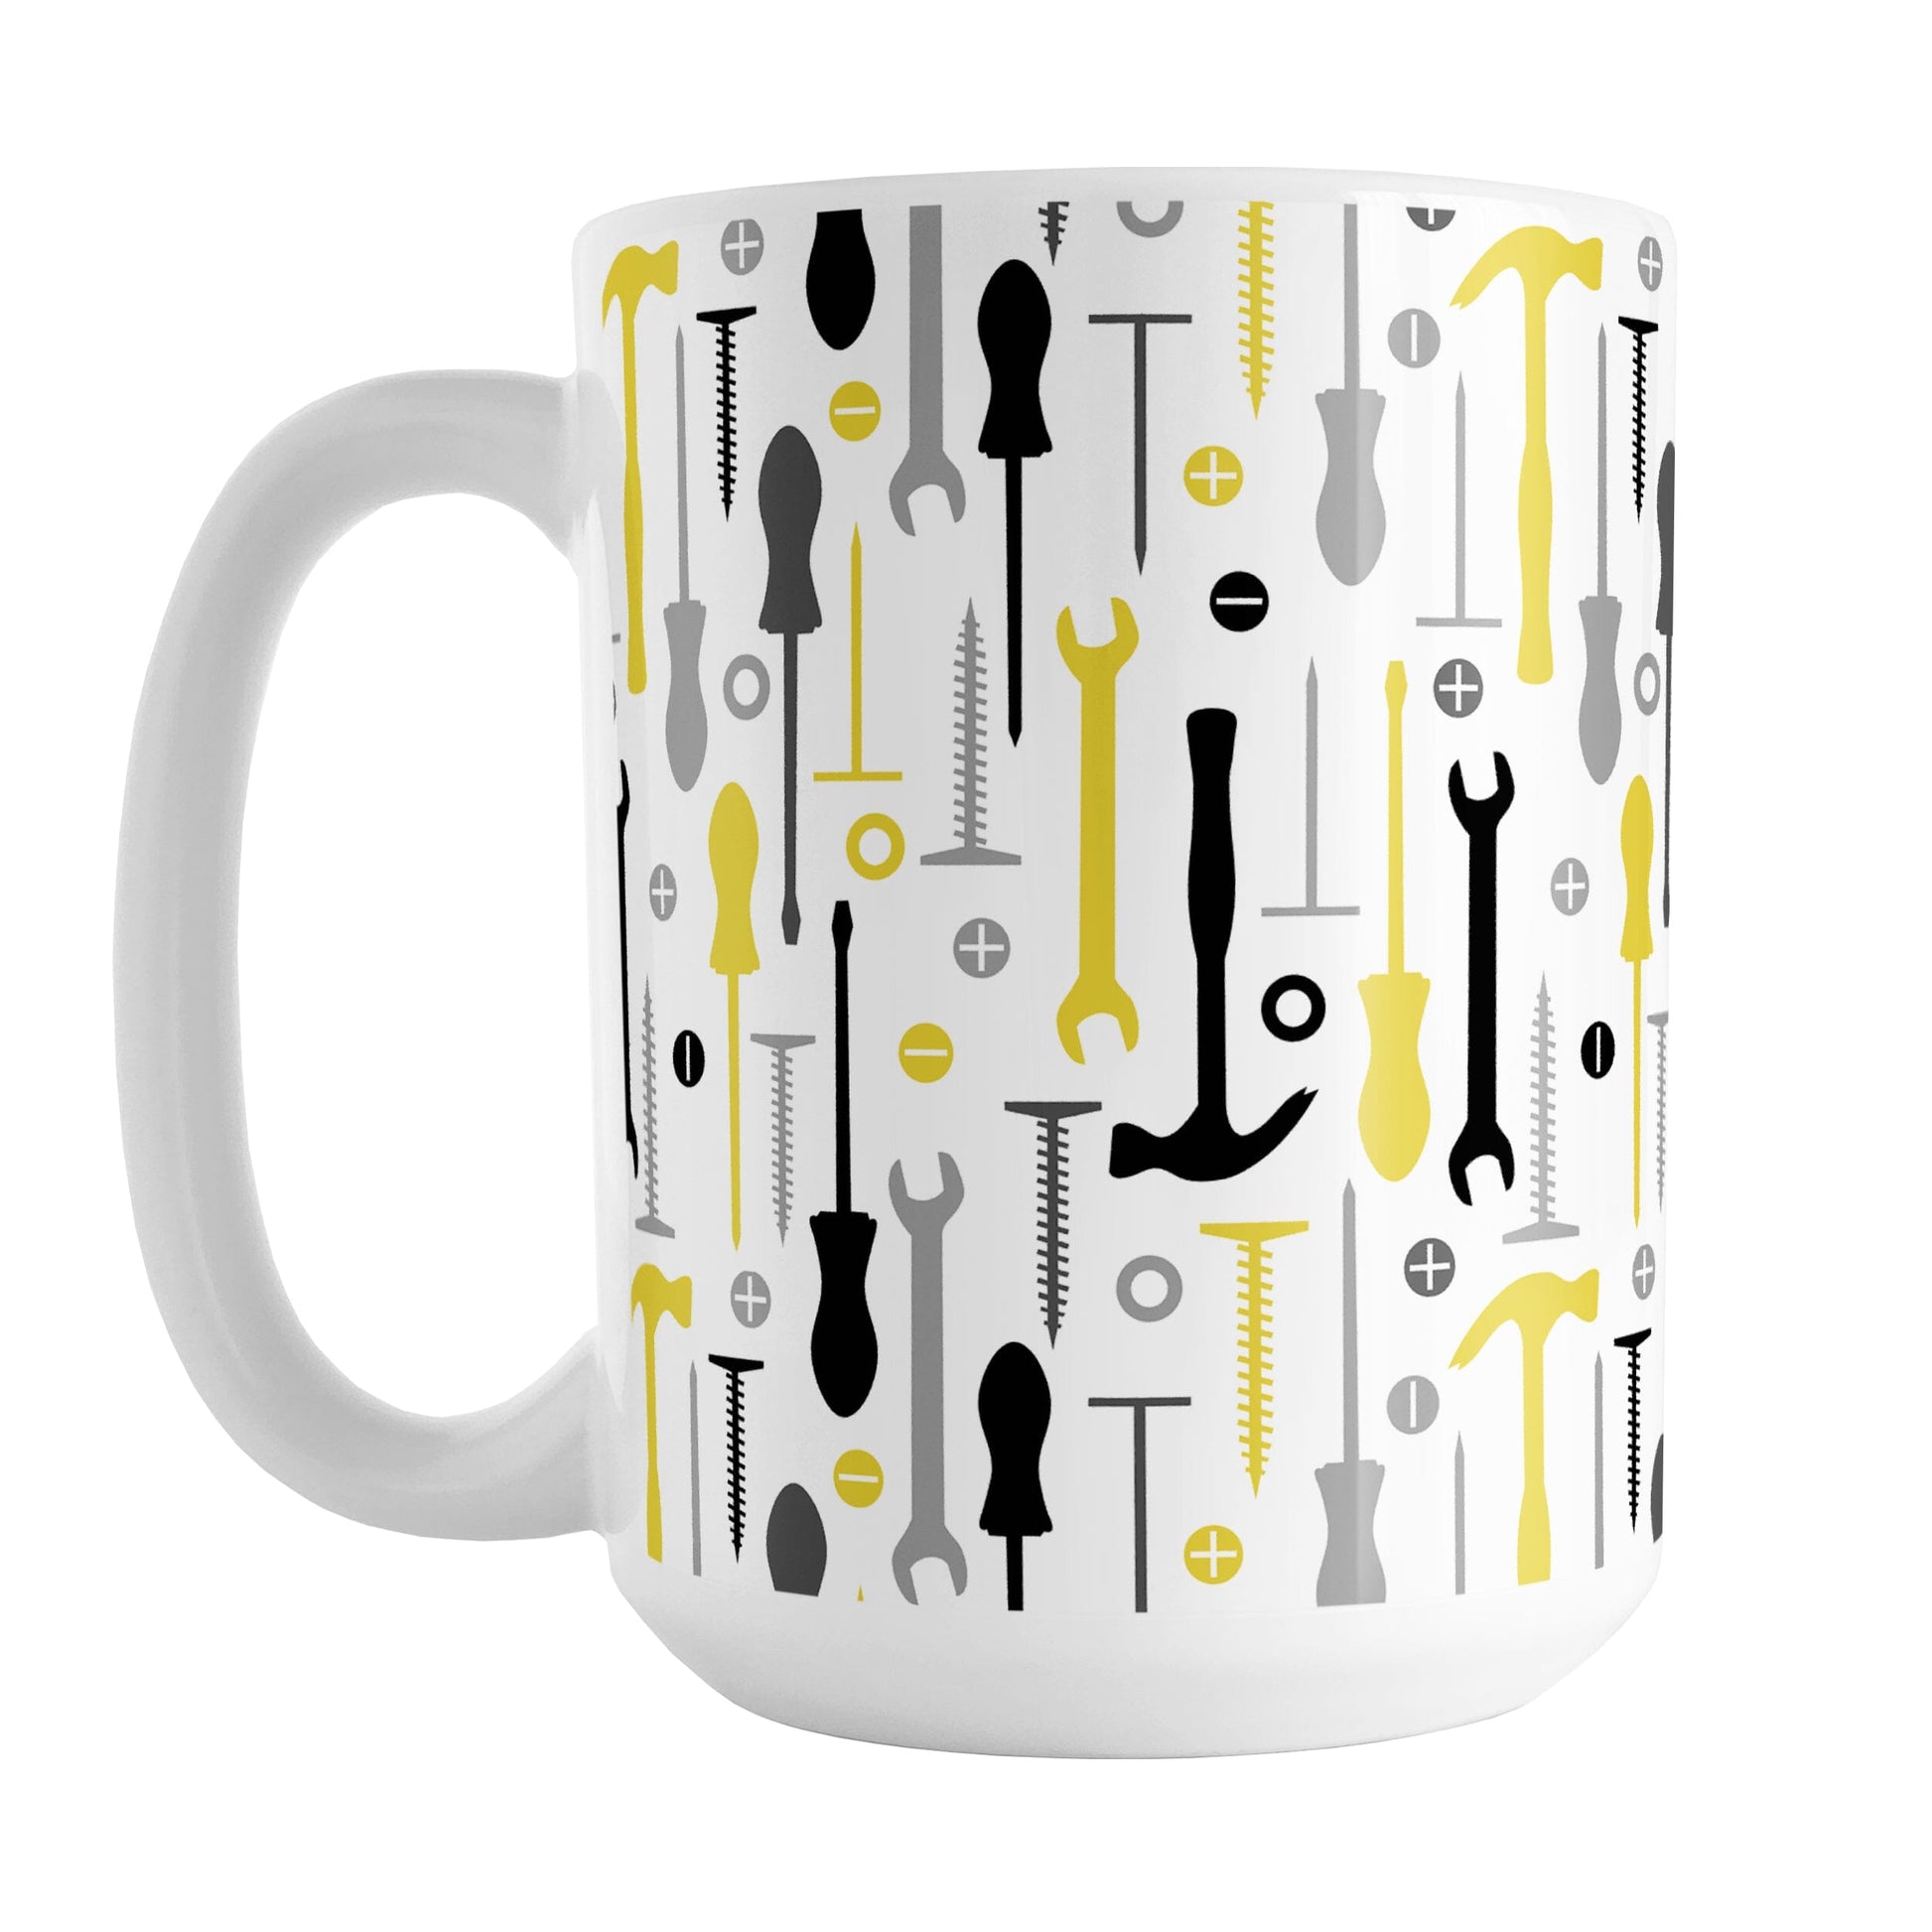 Yellow Tools Pattern Mug (15oz) at Amy's Coffee Mugs. A ceramic coffee mug with a modern style pattern of tools in yellow, black, and gray over white that wraps around the mug to the handle. Perfect for any handyman or contractor or anyone who loves working in their garage on their own. 